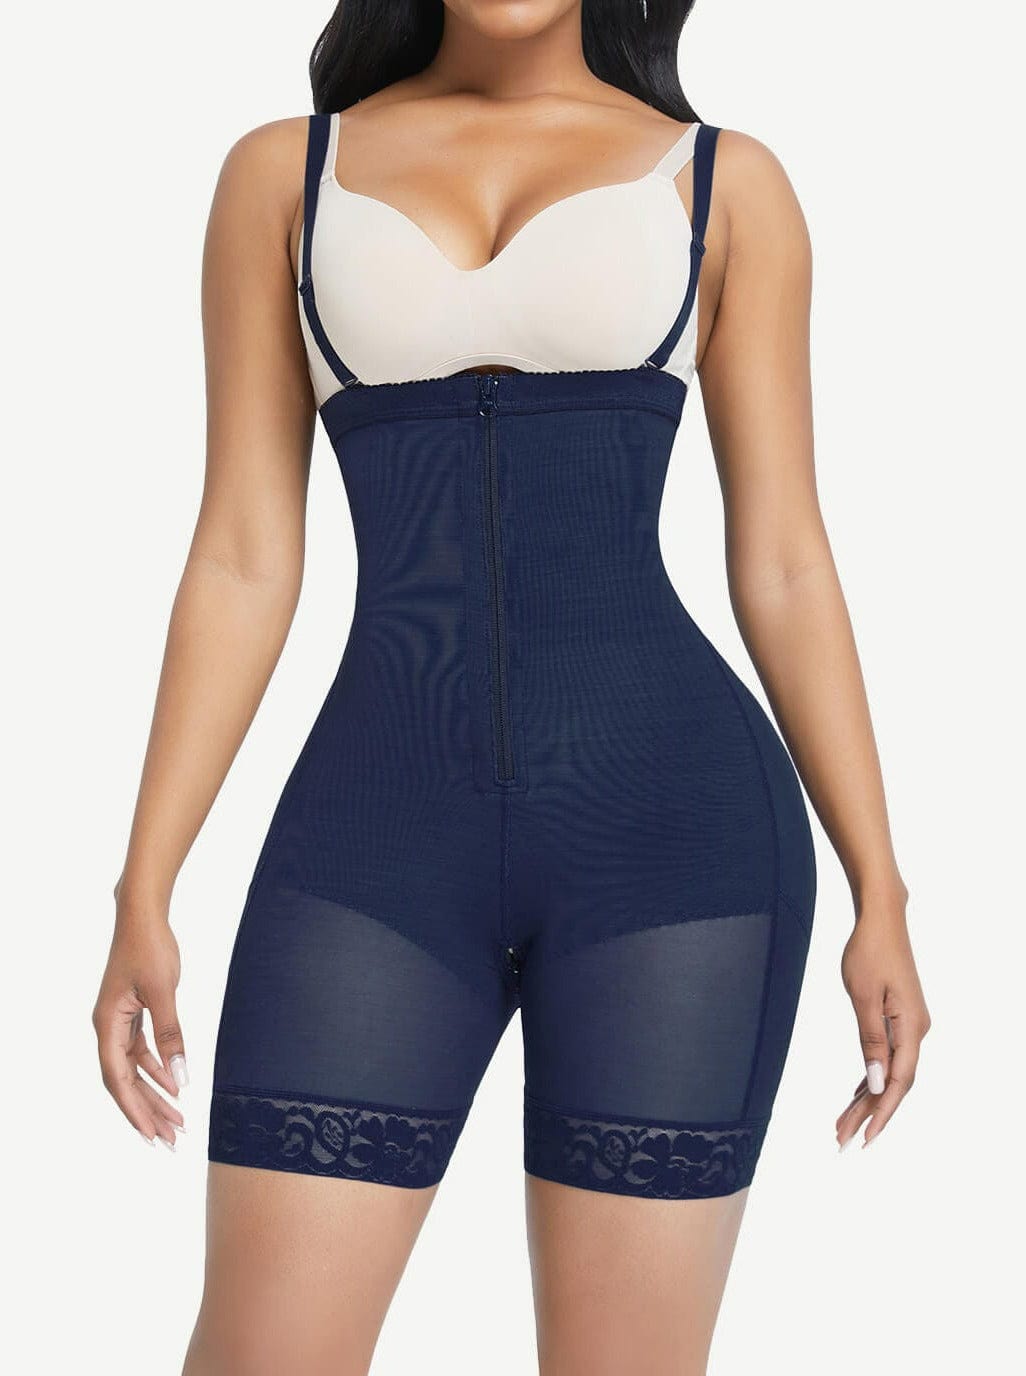 Wholesale/Flash Price] Full Body Shaper Tummy Control High Waist Body Shaper  for Ladies Girl and Women